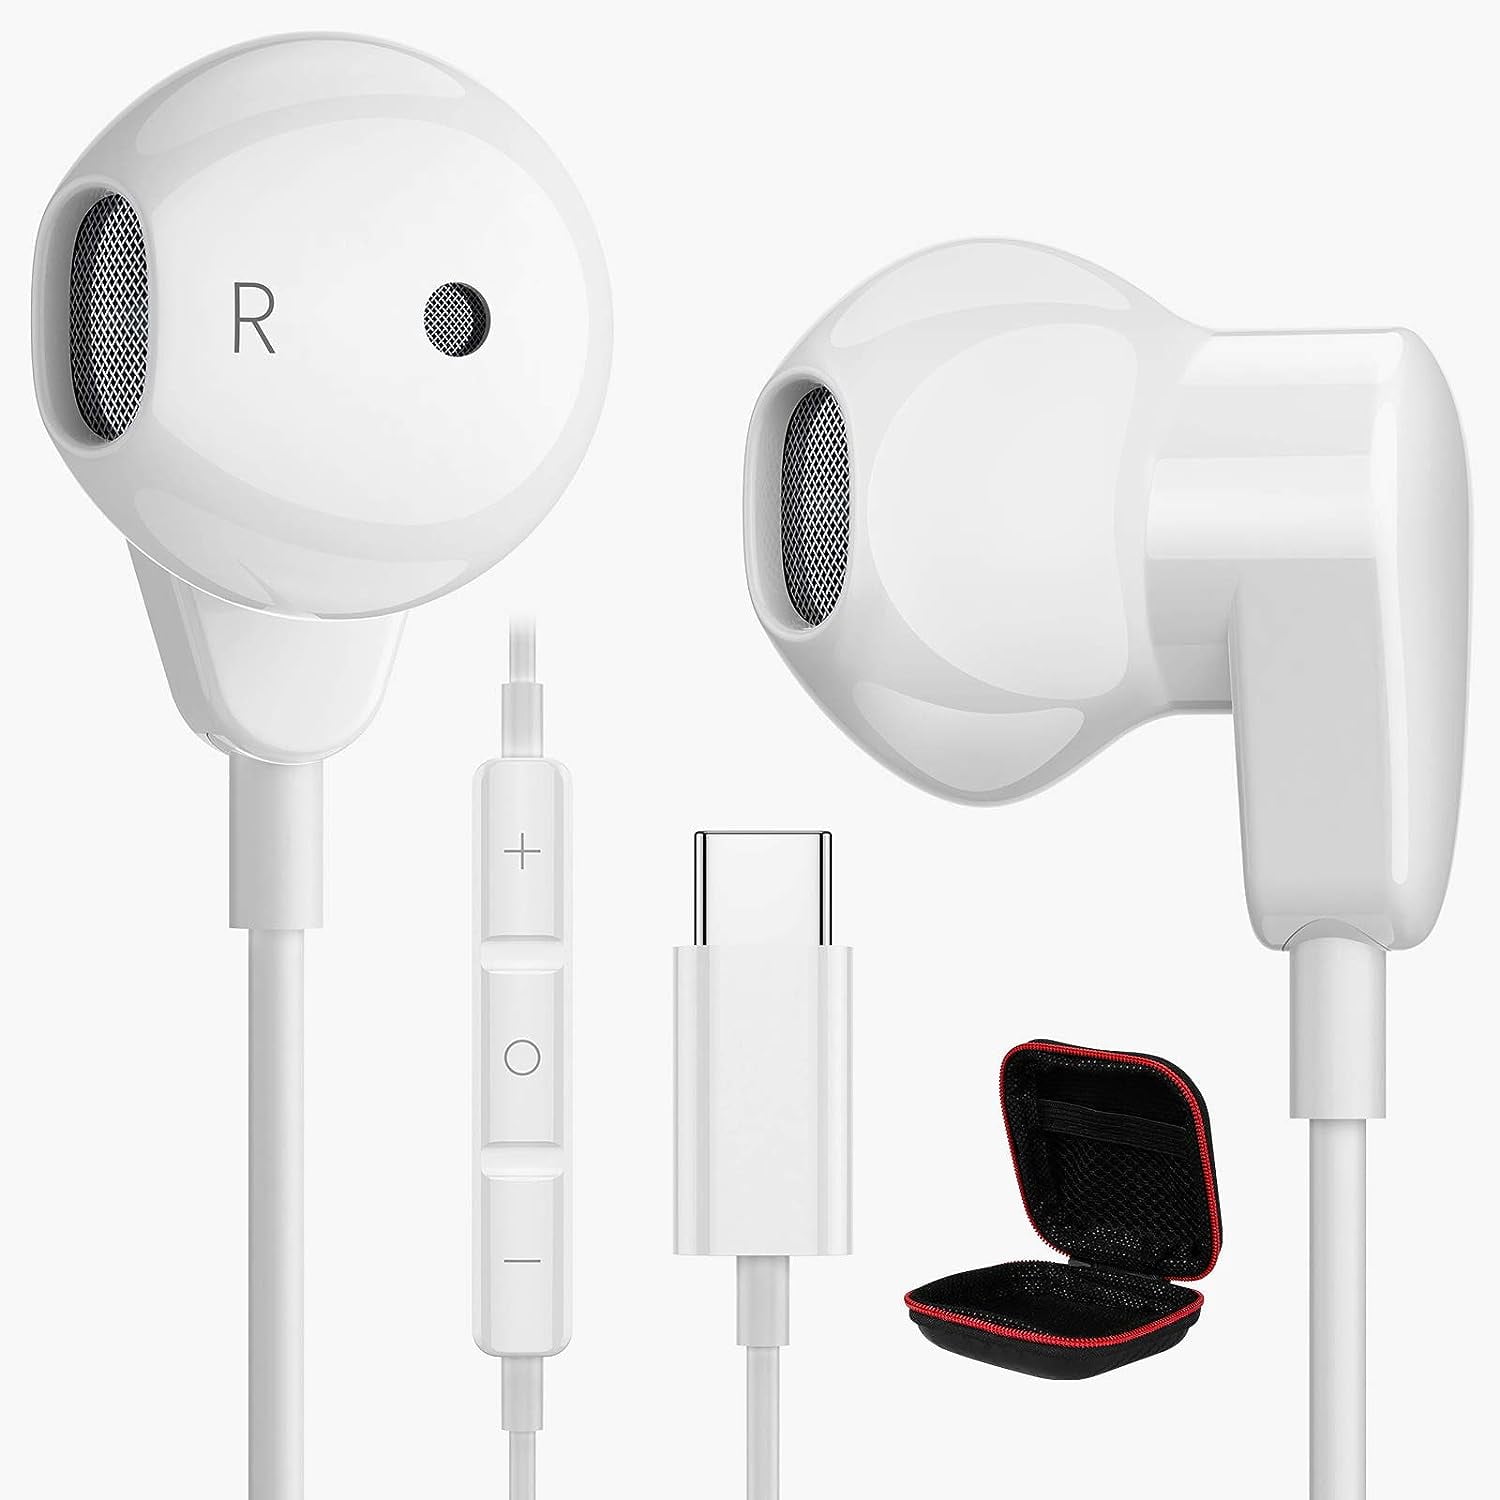 USB C Headphones Galaxy S23 S22 A53 Z Fold5 Flip5, A USB C Earphones with Microphone Android Wired Earbuds Noise Canceling Headset for Samsung S21 S20 FE Tab